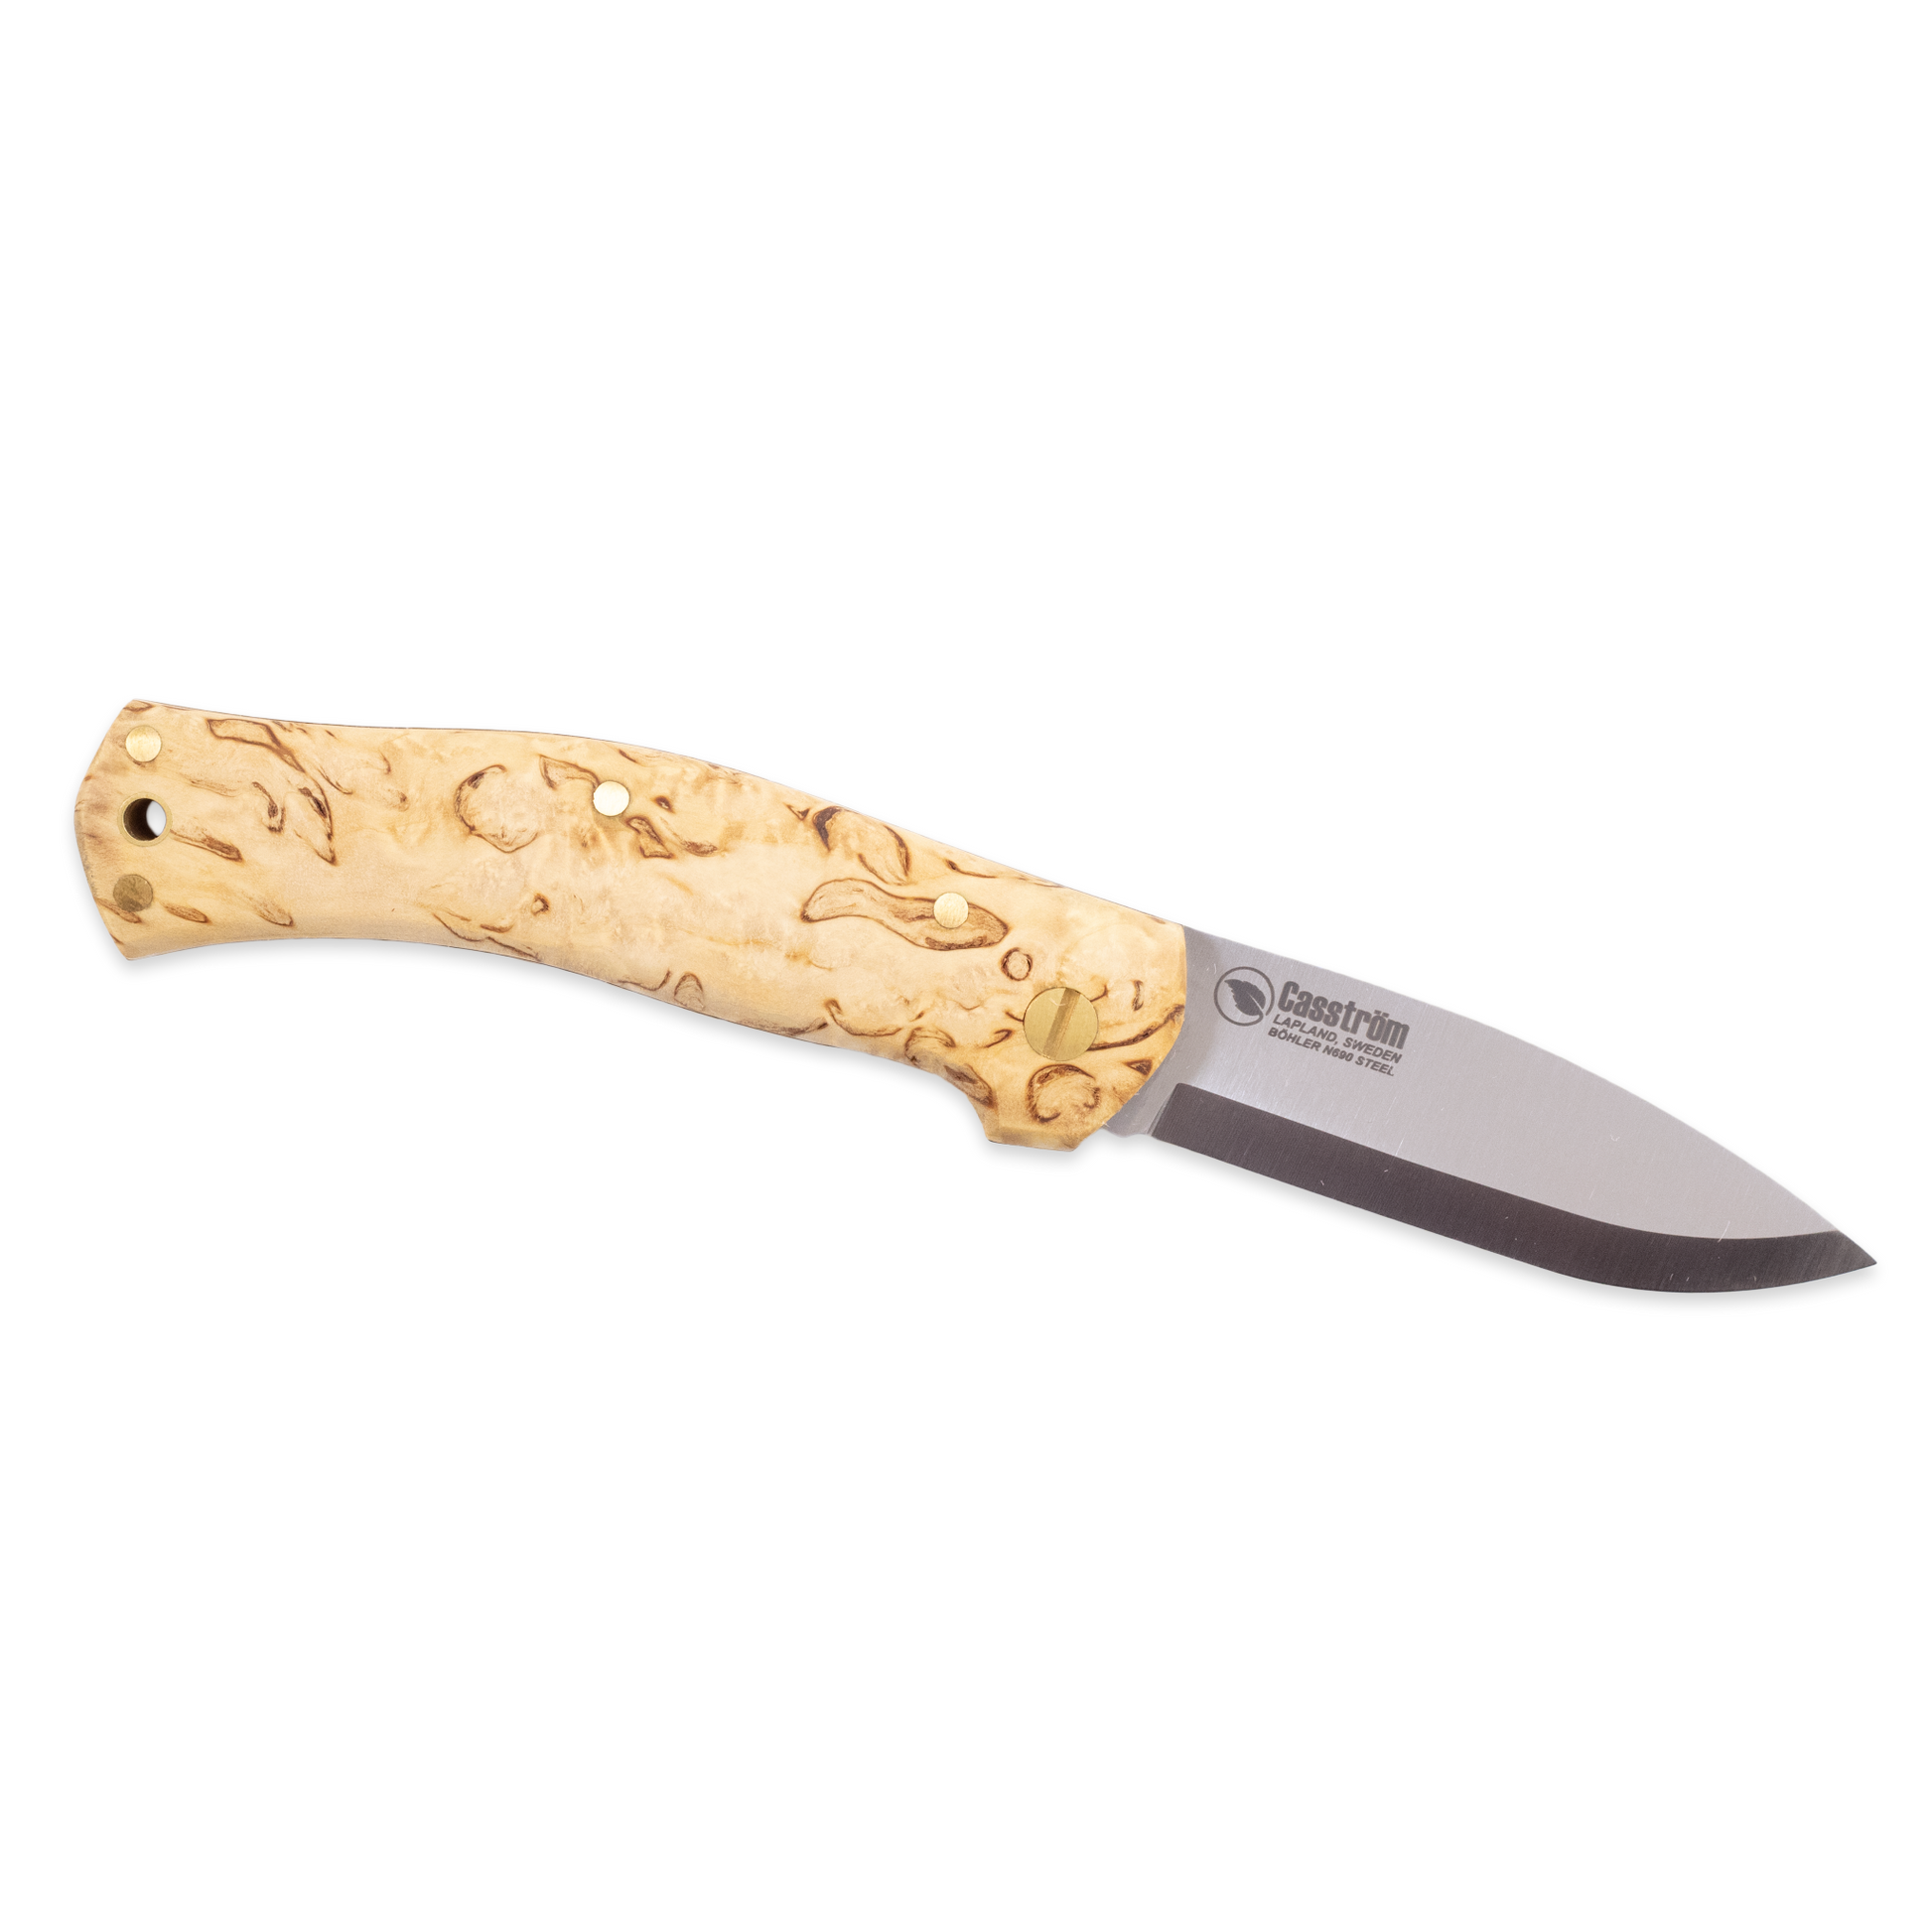 UK-legal folding knife, stainless steel blade, curly birch handle,, made by Casstrom Sweden